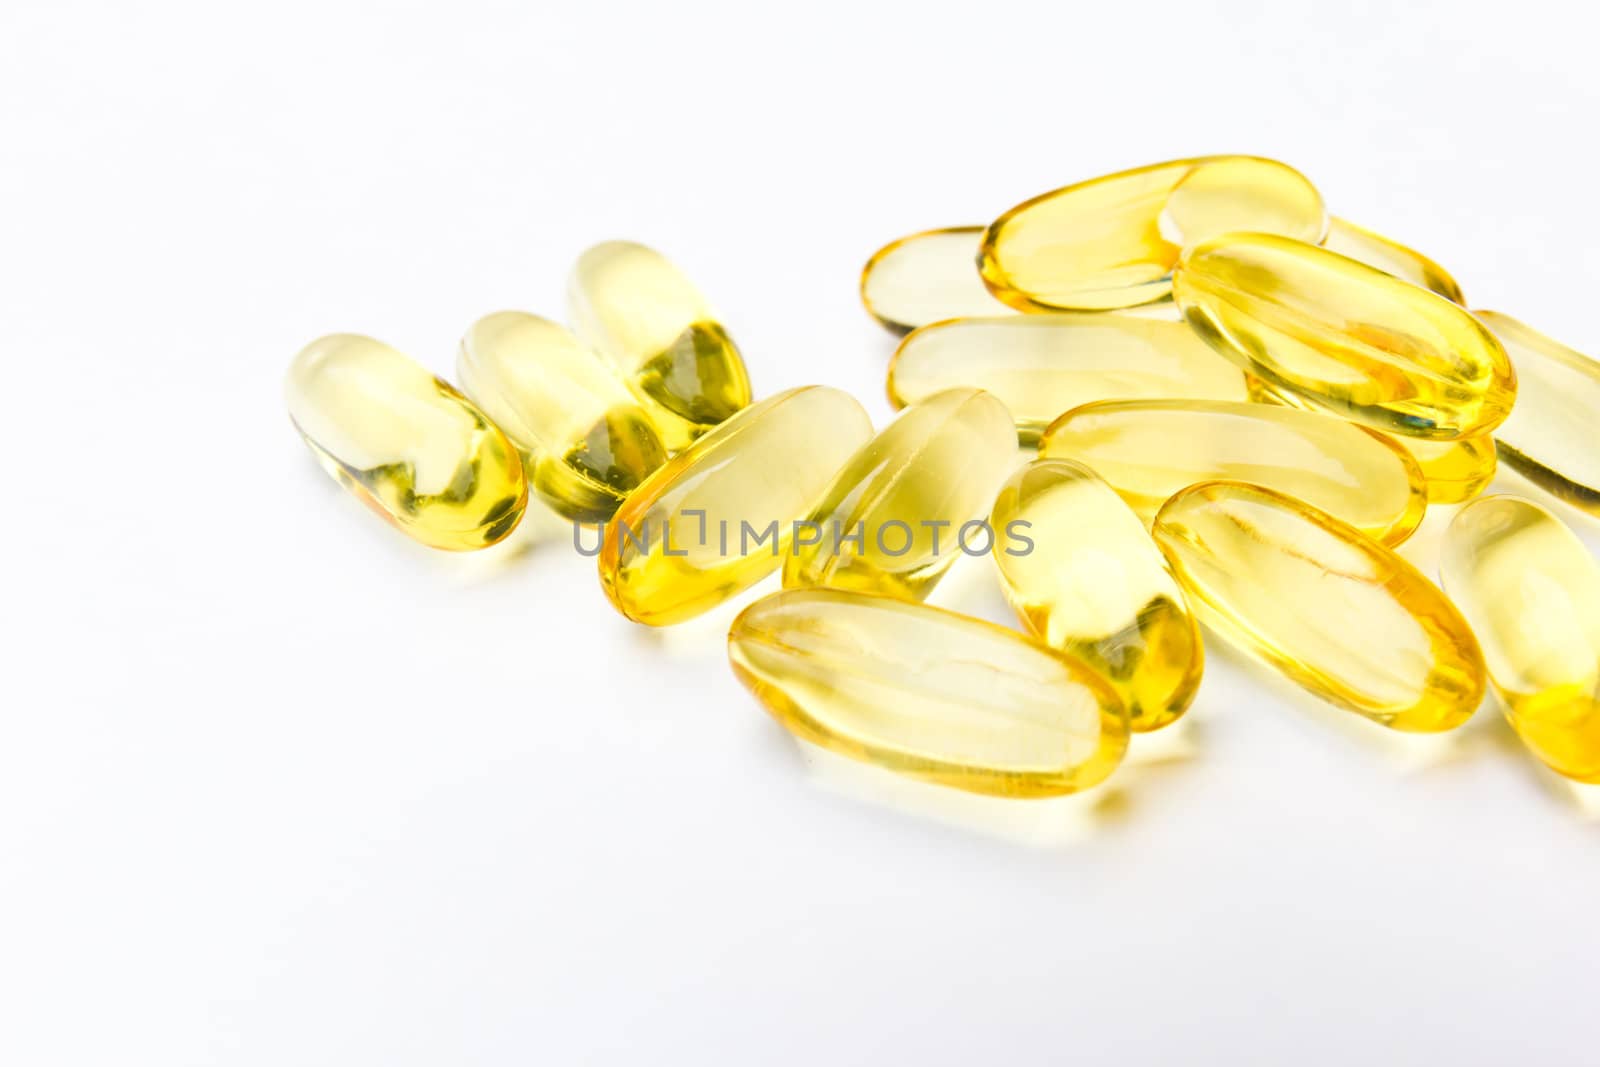 fish oil capsule by tungphoto